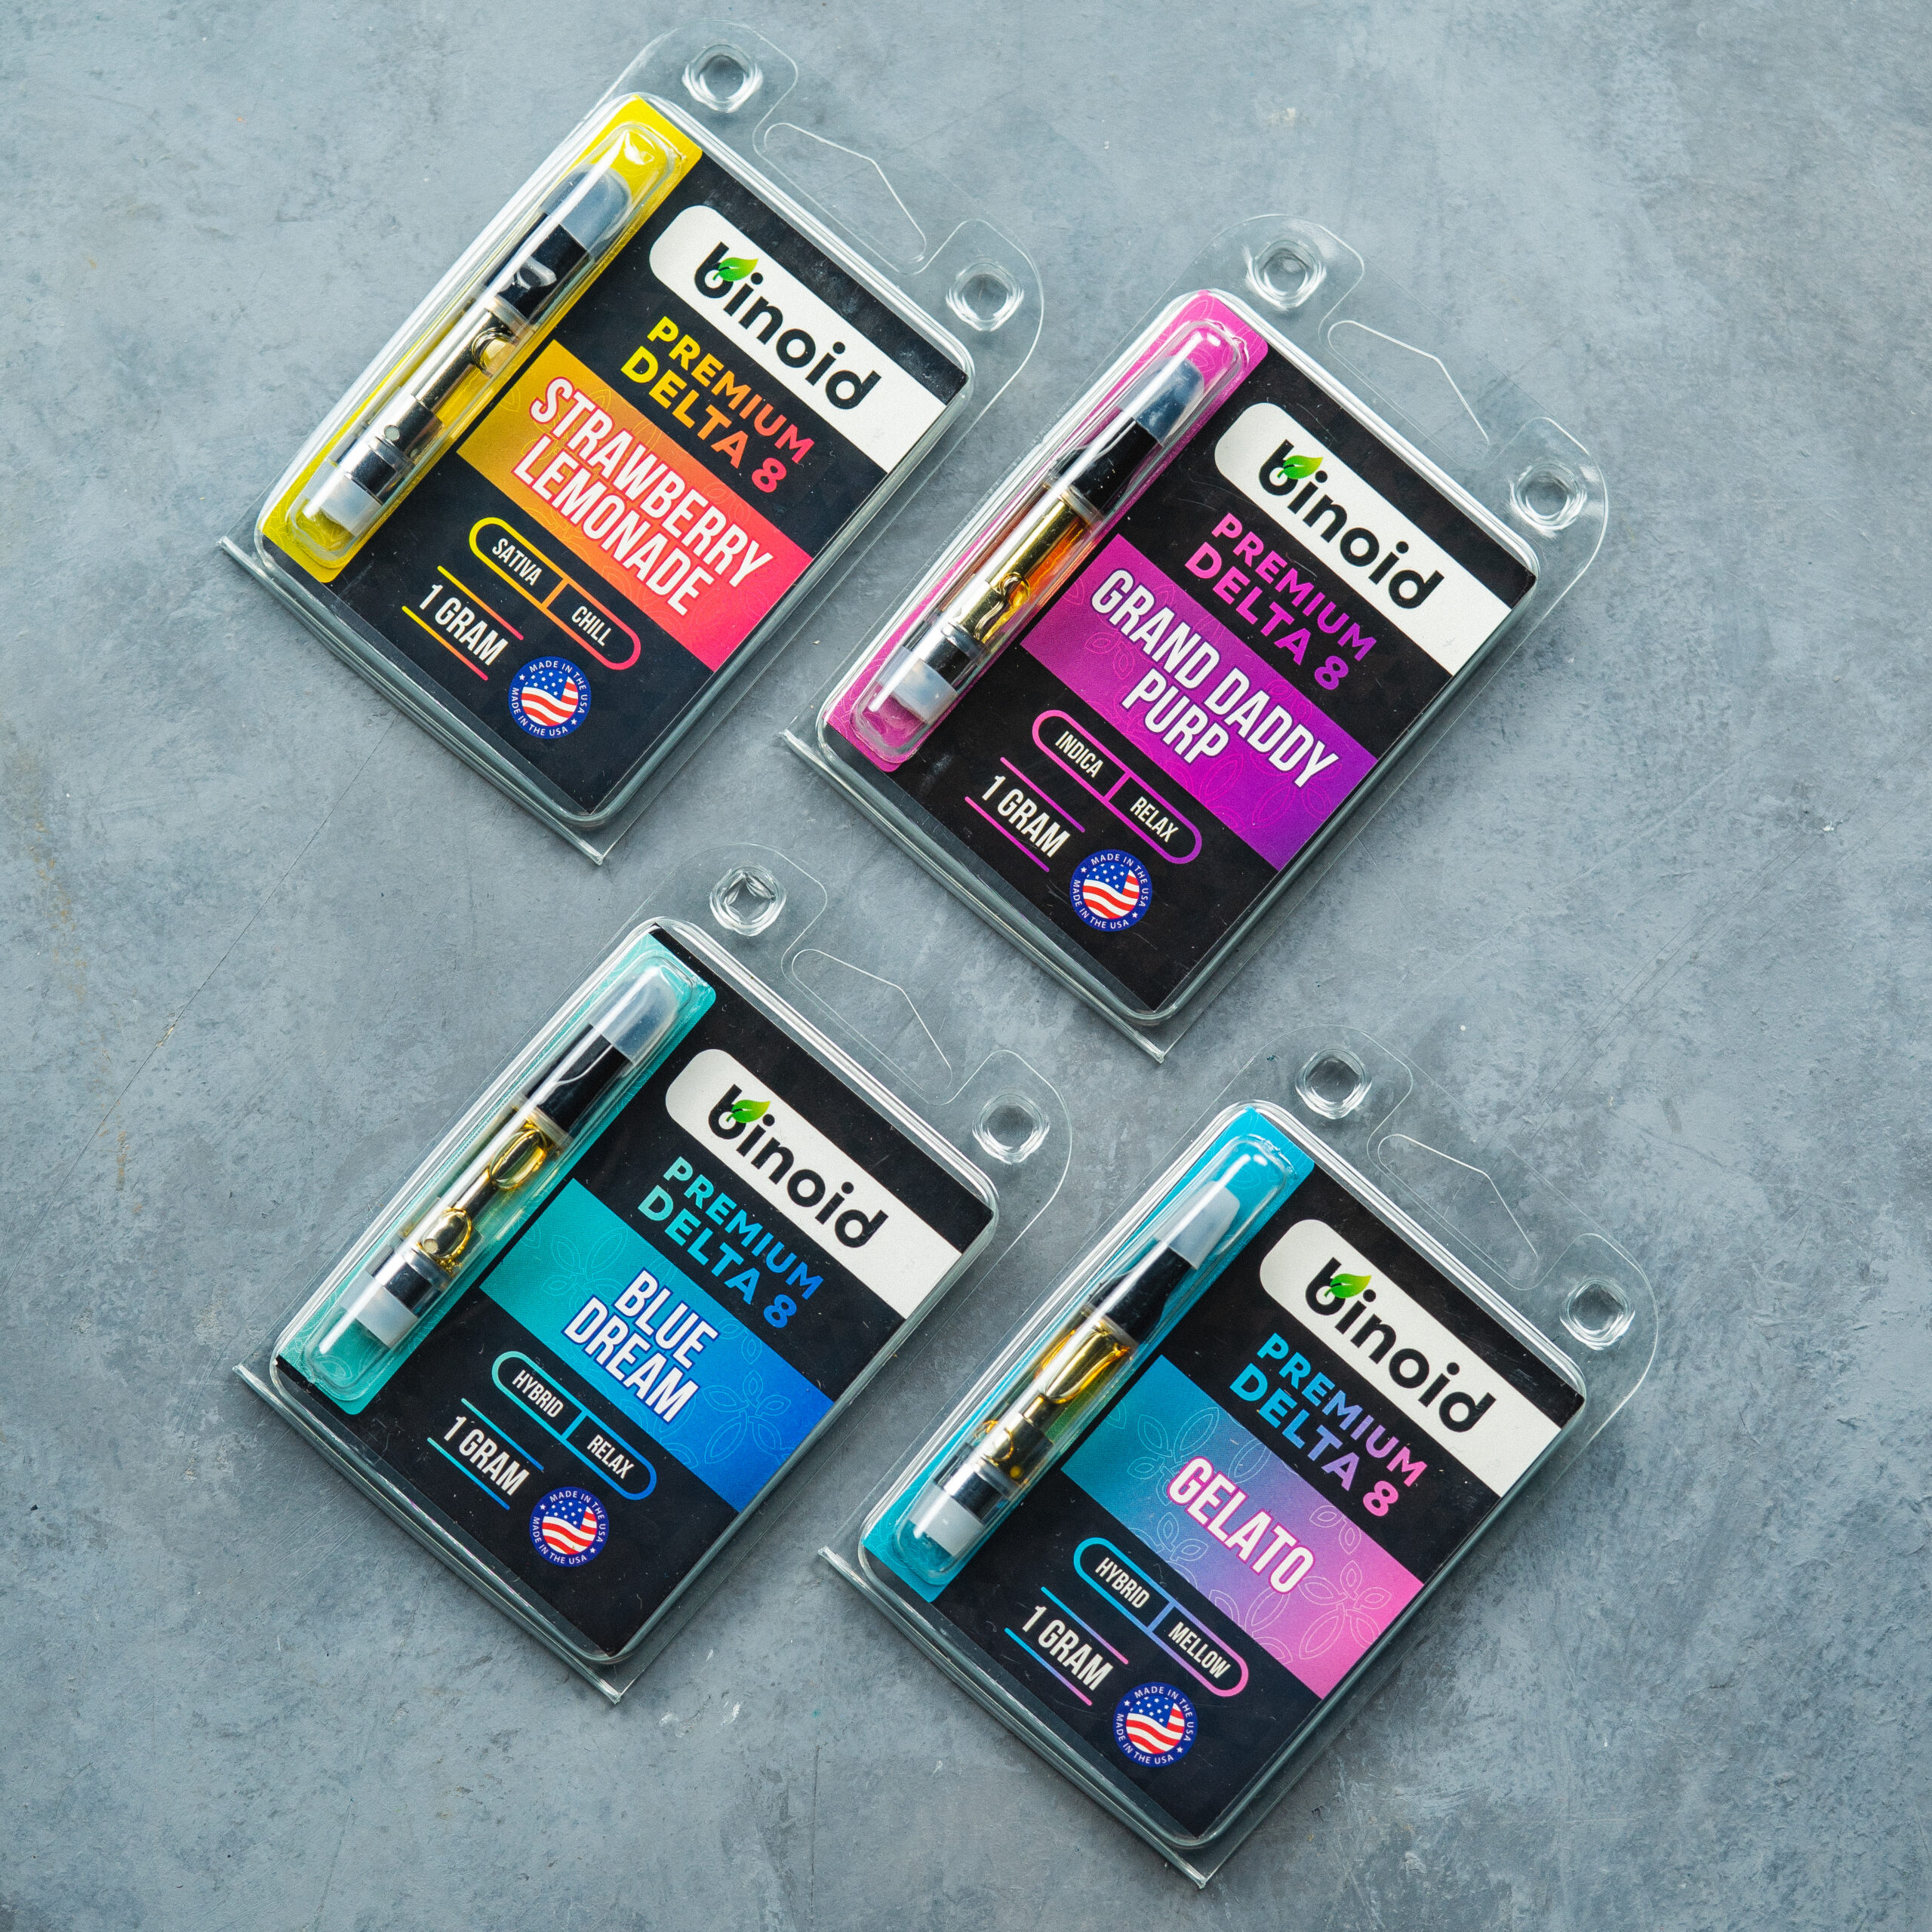 Binoid’s Vape Cartridges Are the Best Way to Get Your Delta 8 THC–and You Can Save Big on a Bundle